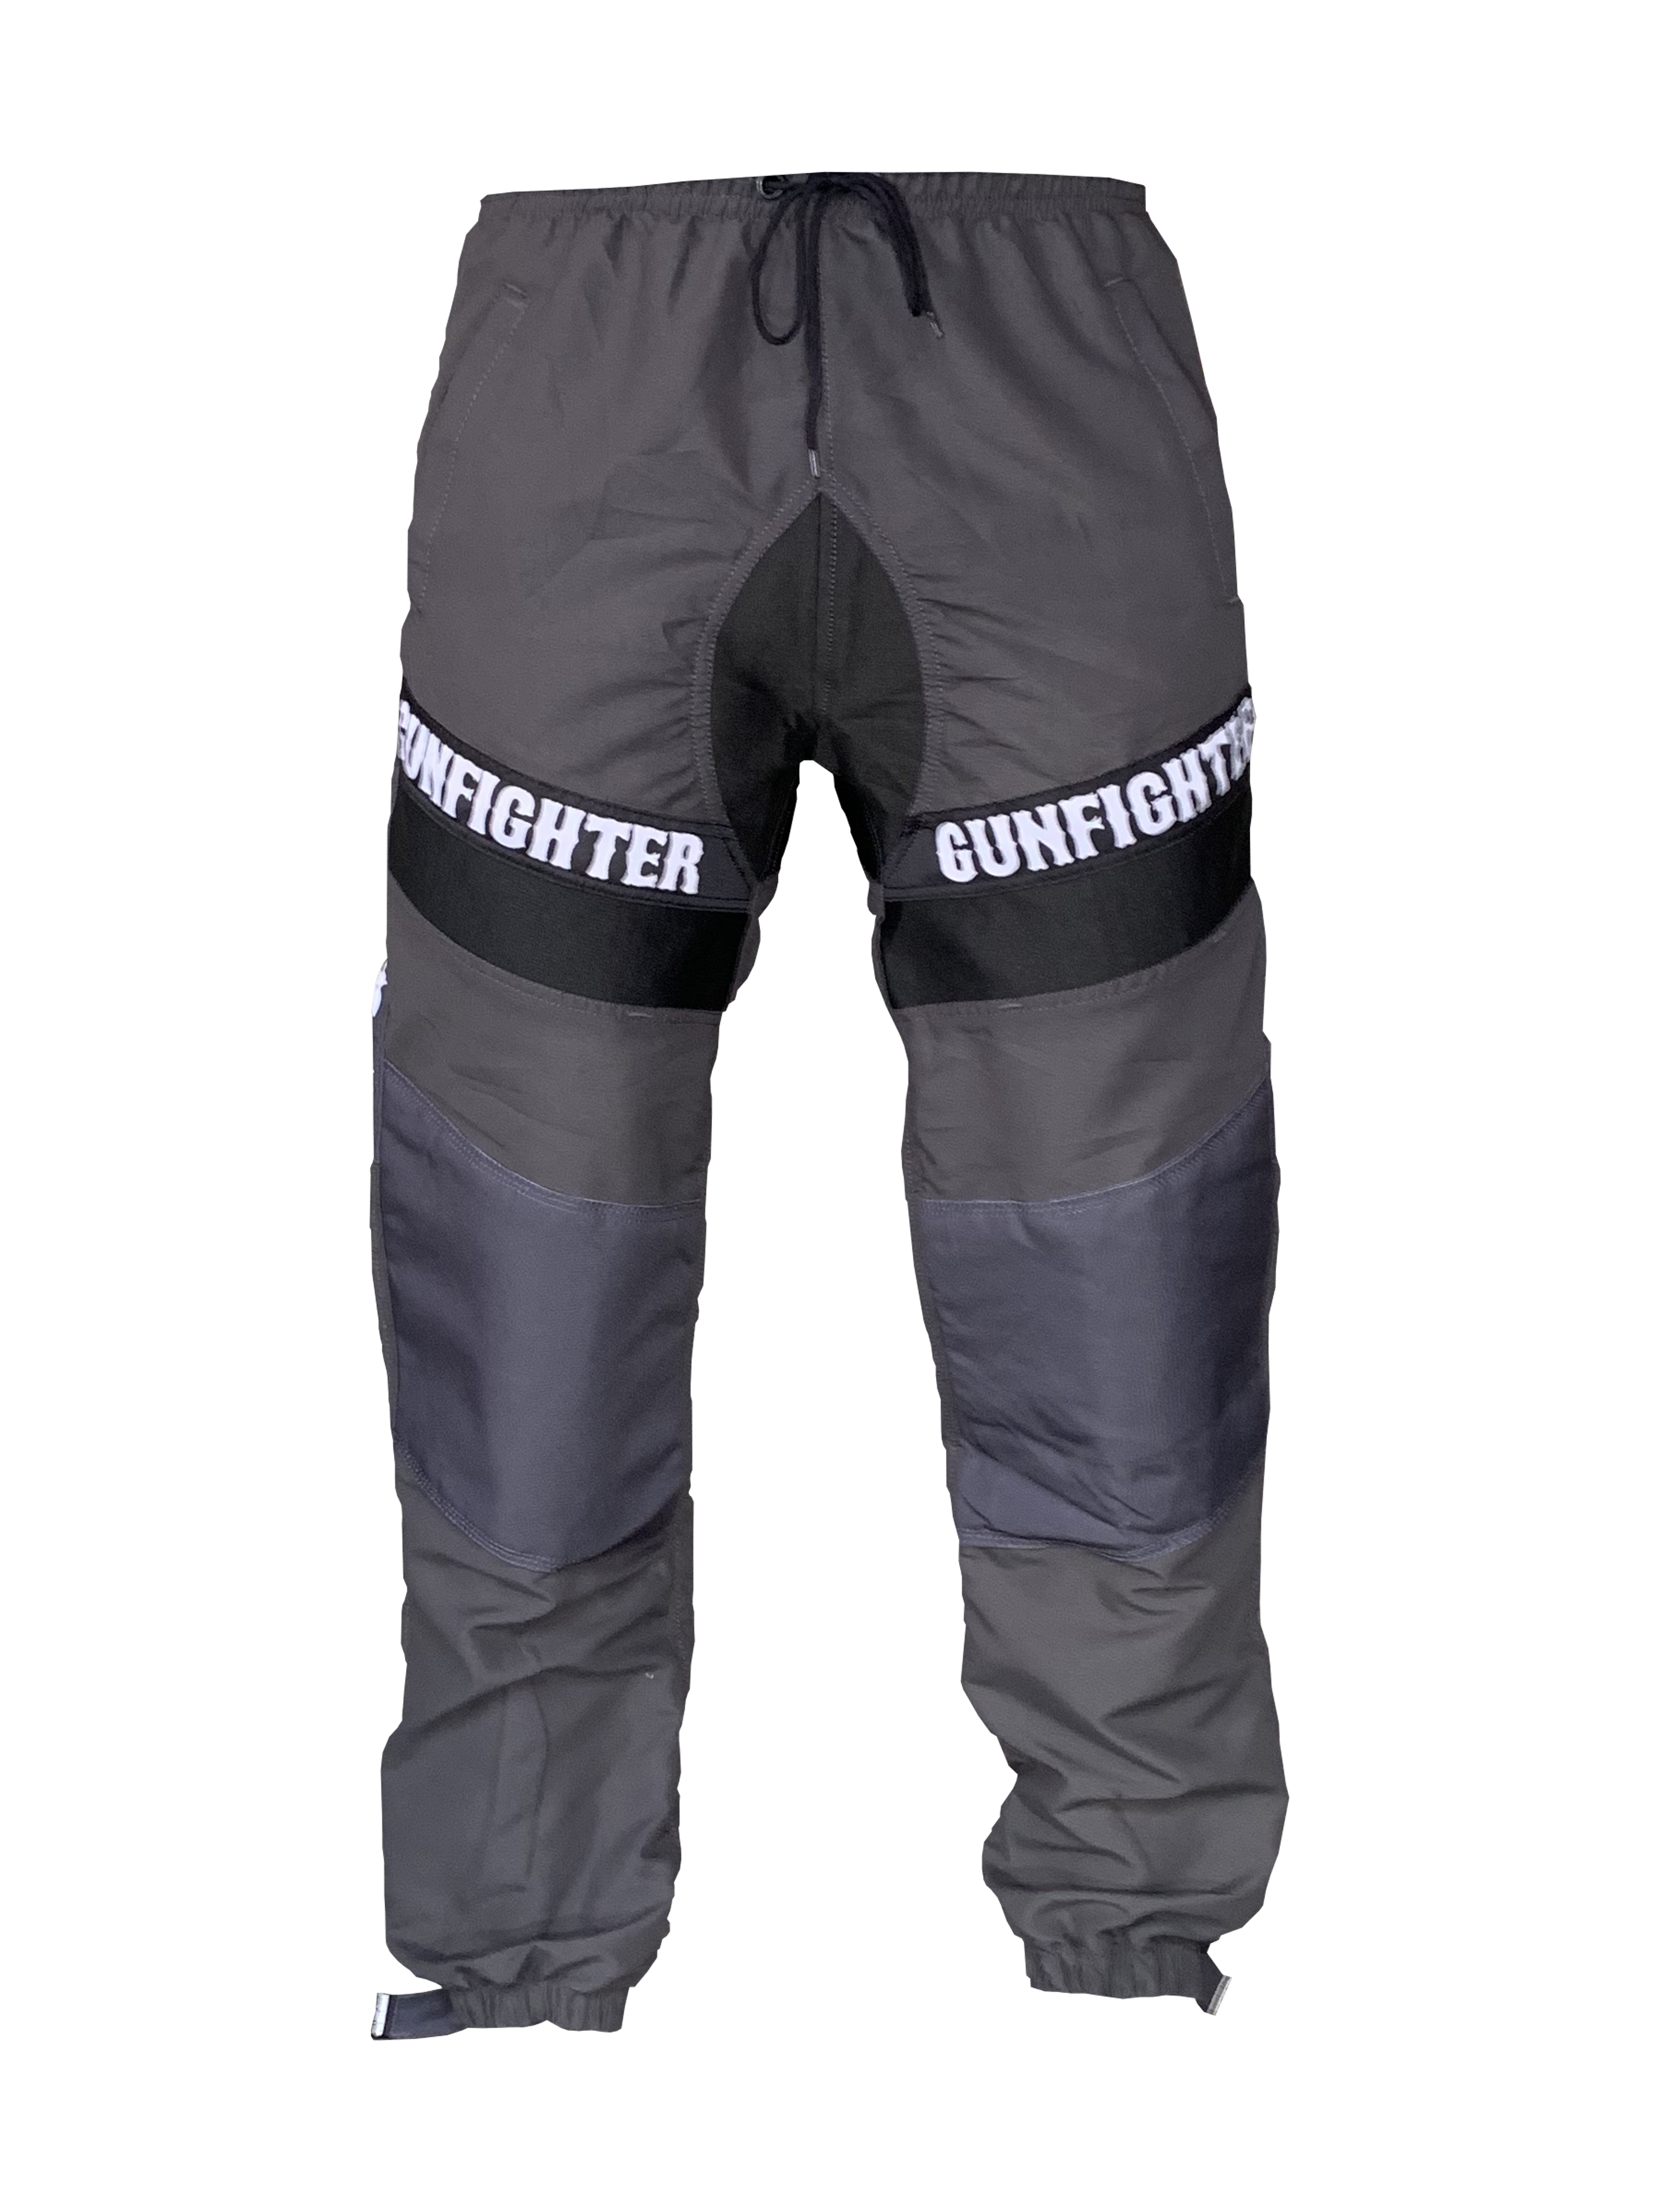 Gunfighter Sports OUTLAW Jogger - Charcoal